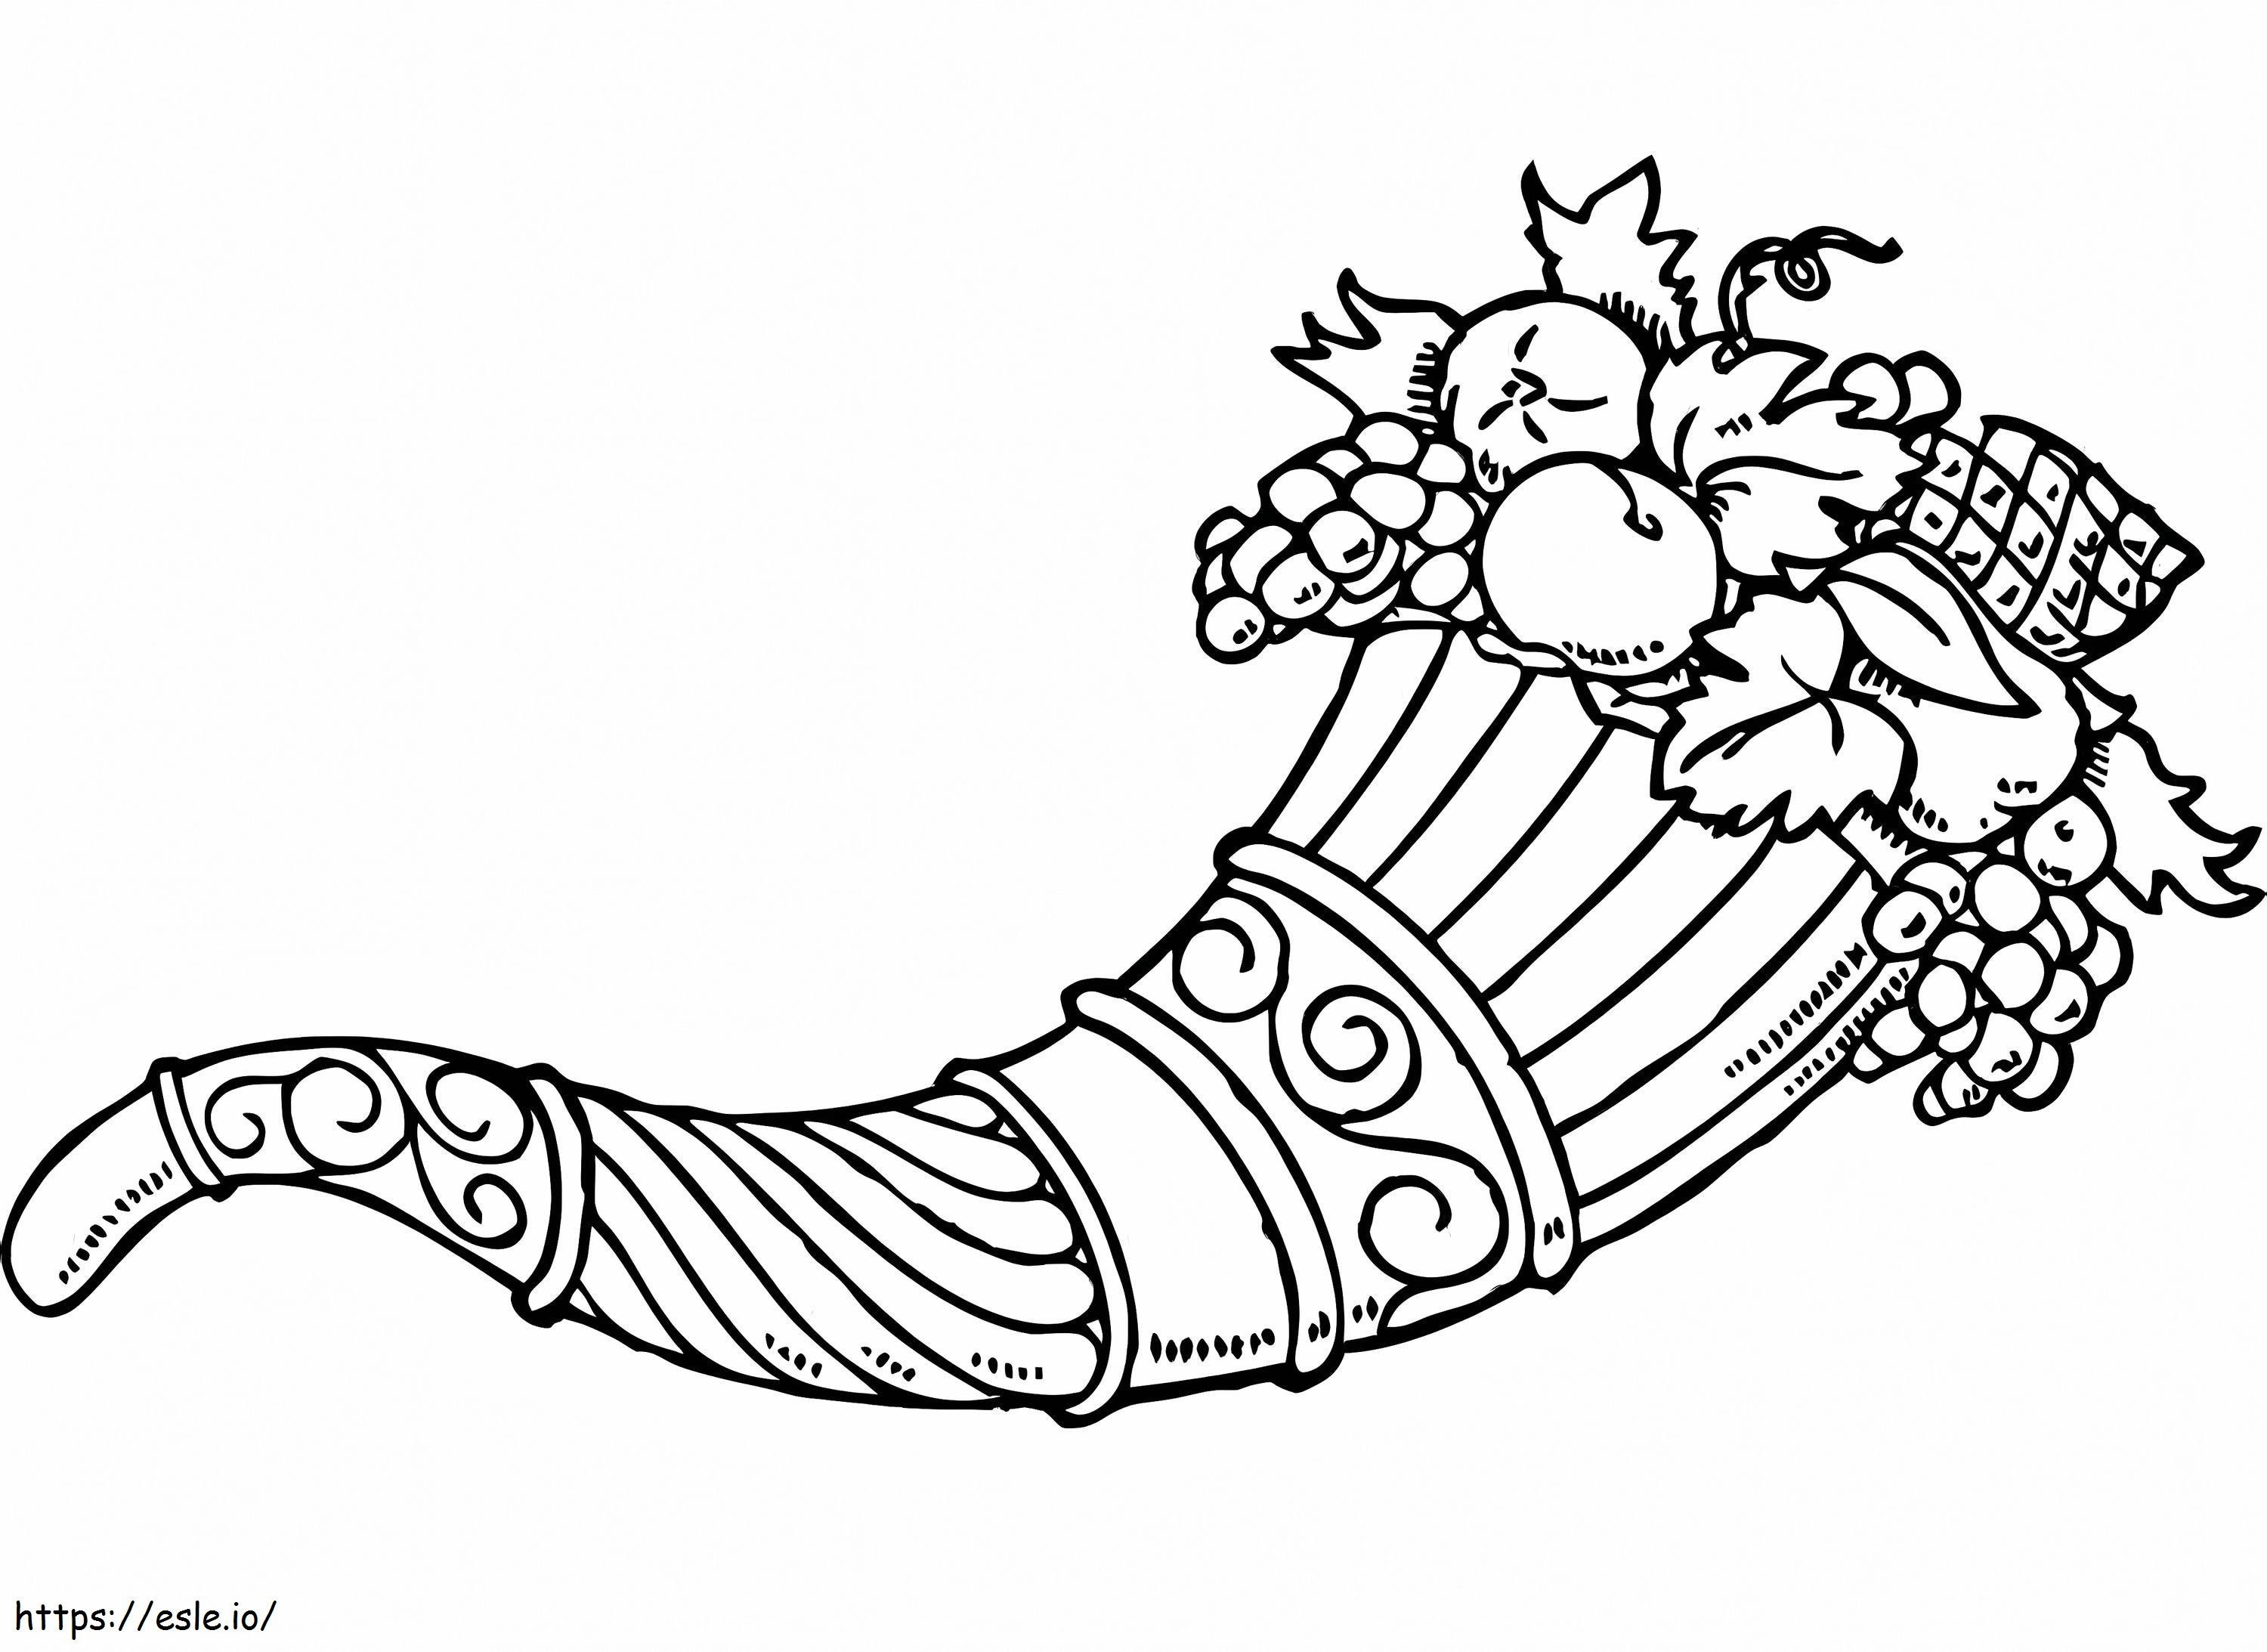 Horn Of Plenty 3 coloring page